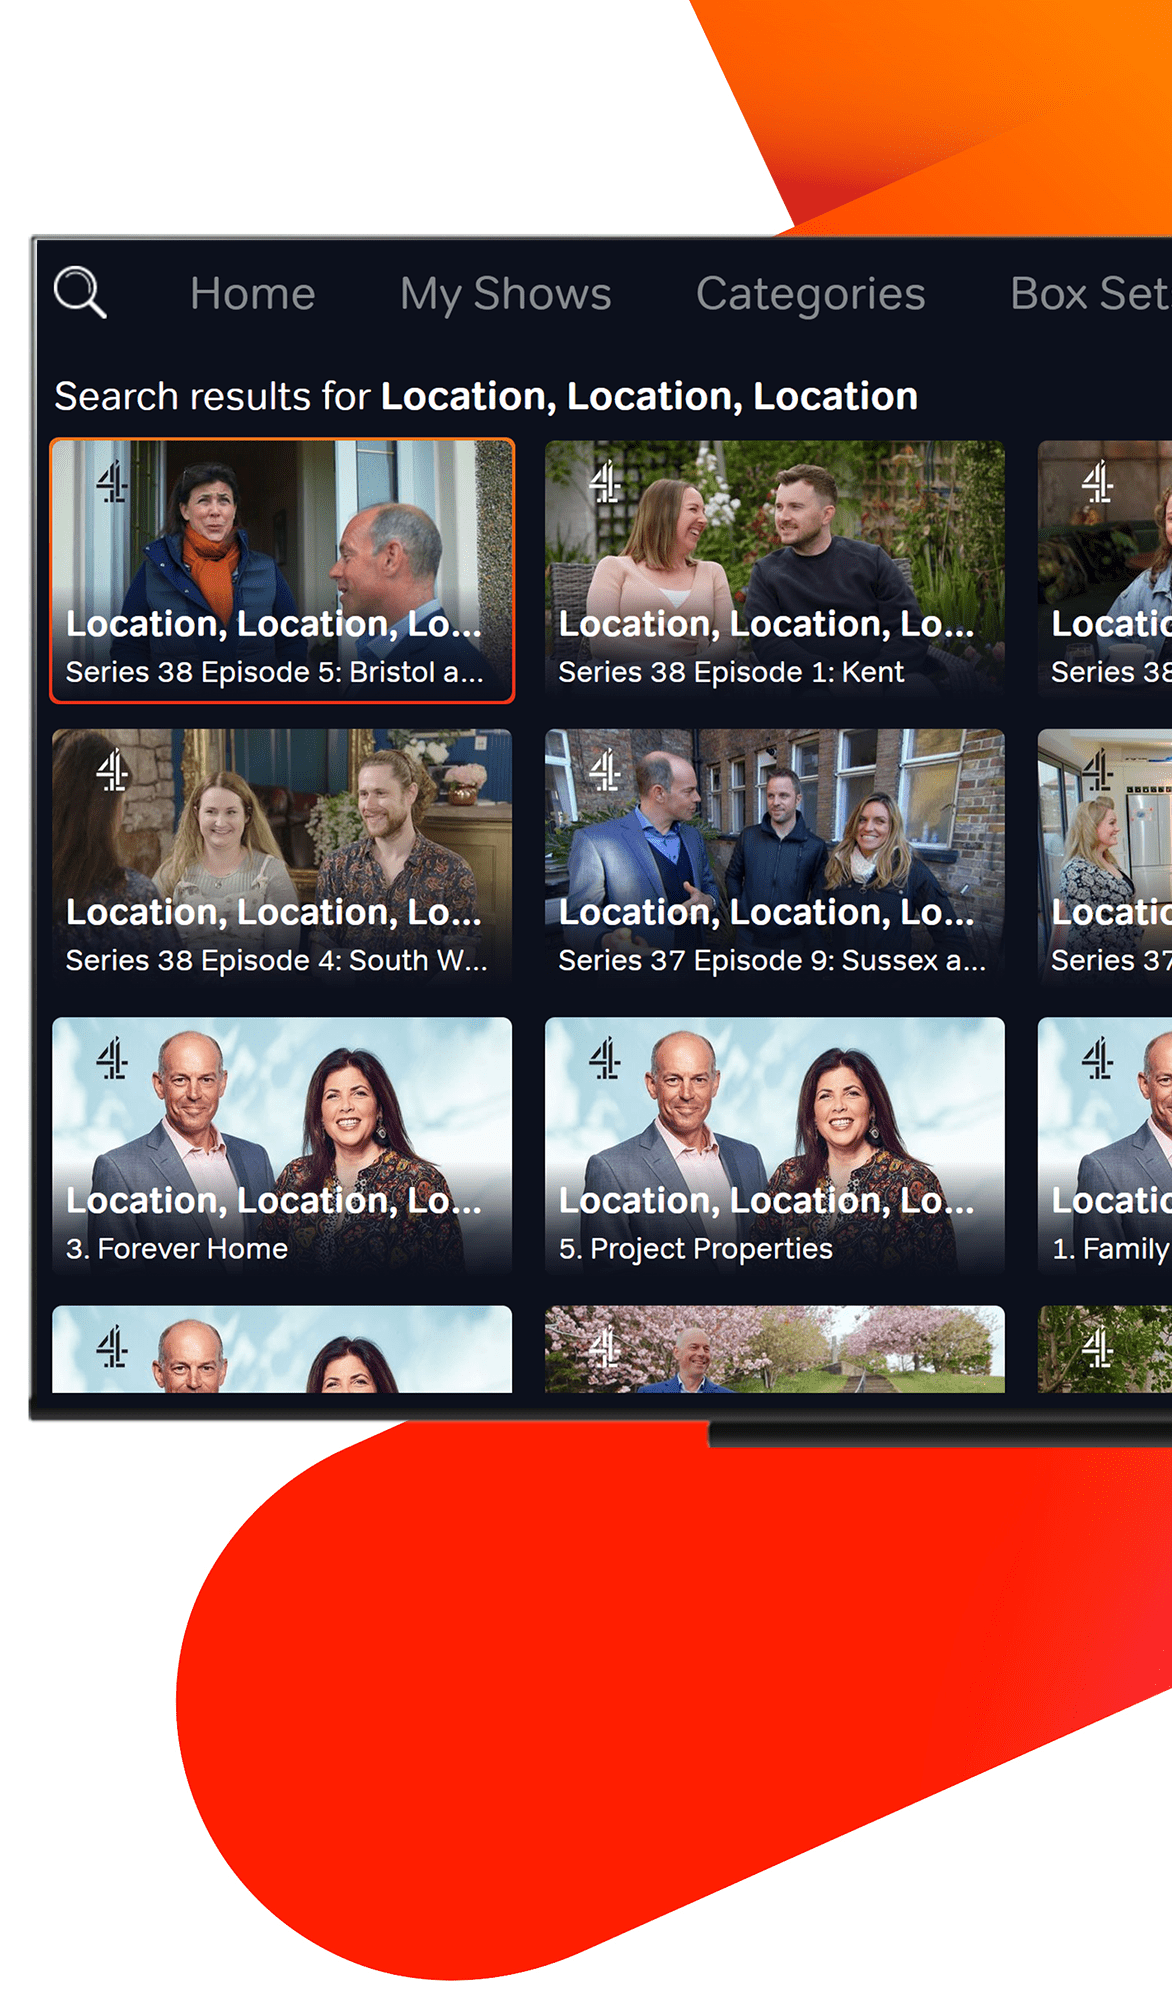 Explore freeview play - property and DIY